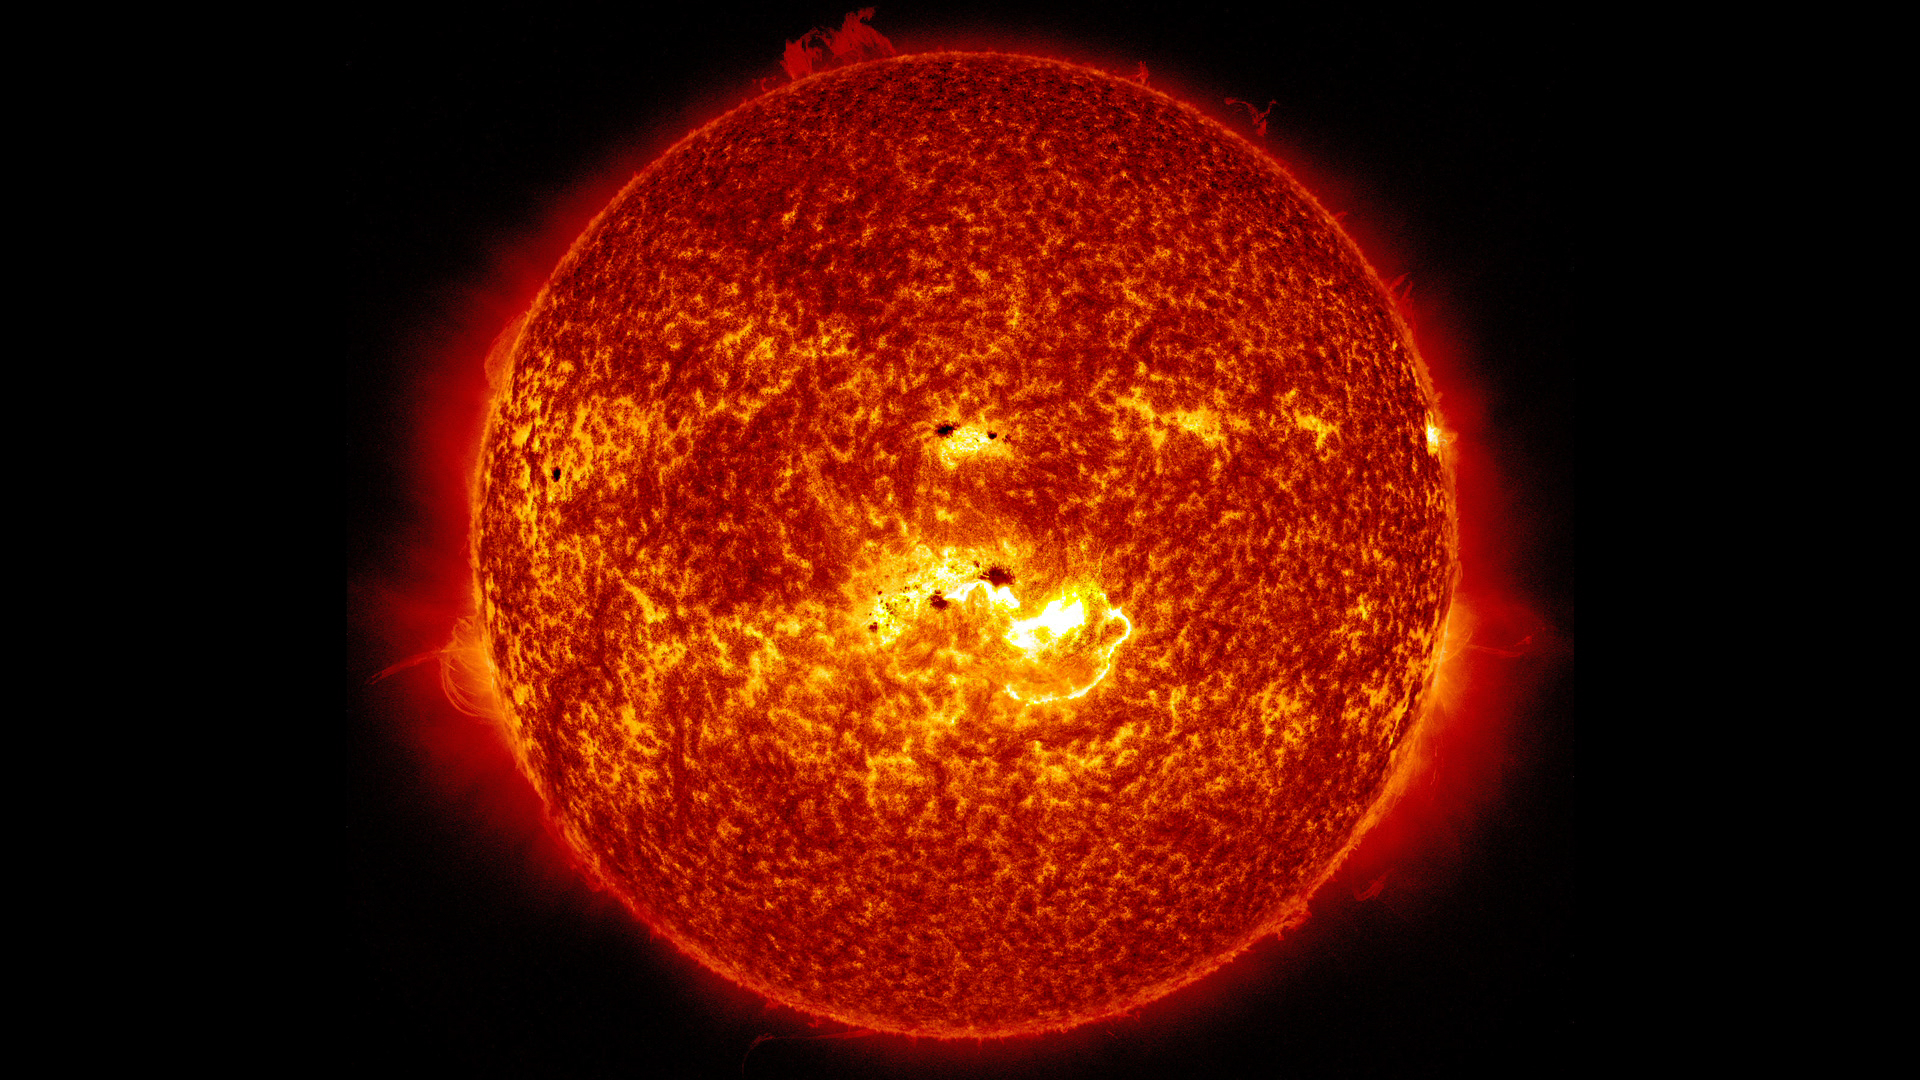 LEAD: What is a X-class solar flare? It is one of the most intense categories of massive bursts of light from the sun.1. This flare erupted on Tuesday, January 7, 2014.2. For scale, the dark-colored sun spot is huge...about twice the size of Earth.3. NASA’s  SDO (Solar Dynamics Observatory) spacecraft, launched in 2010, studies the sun’s magnetic fields.4. Flares are related to the reconnection, or short-circuiting, of magnetic loopsTAG: Though not a threat to humans, SOME solar flares can disrupt GPS and communication signals.